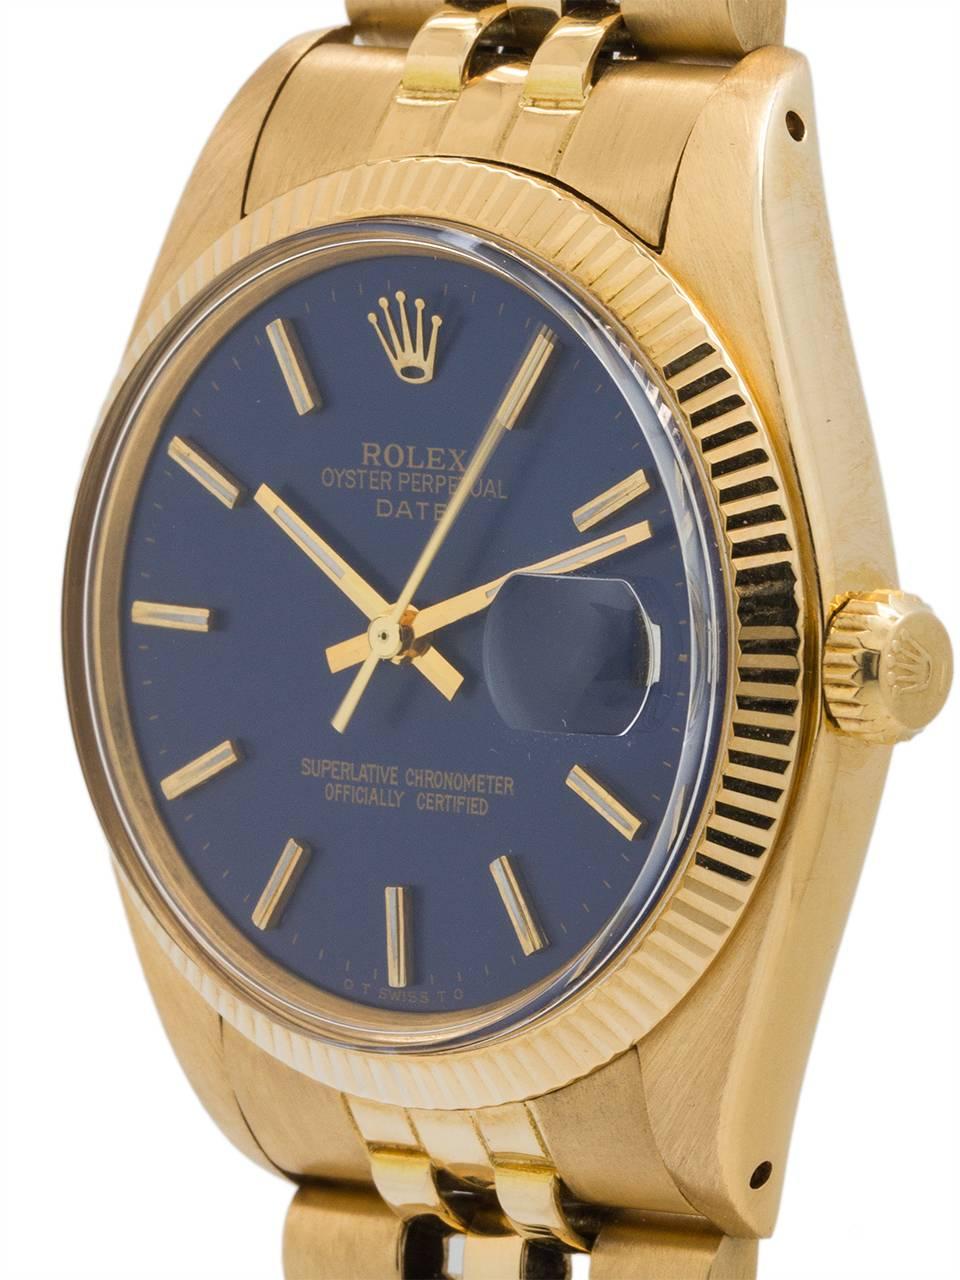 Rolex Oyster Perpetual Date ref 15037 serial #6.3 million circa 1980. Featuring 34mm diameter case with fluted bezel, acrylic crystal, and original Rolex dial which has been custom colored a beautiful cobalt blue color with applied gold indexes and